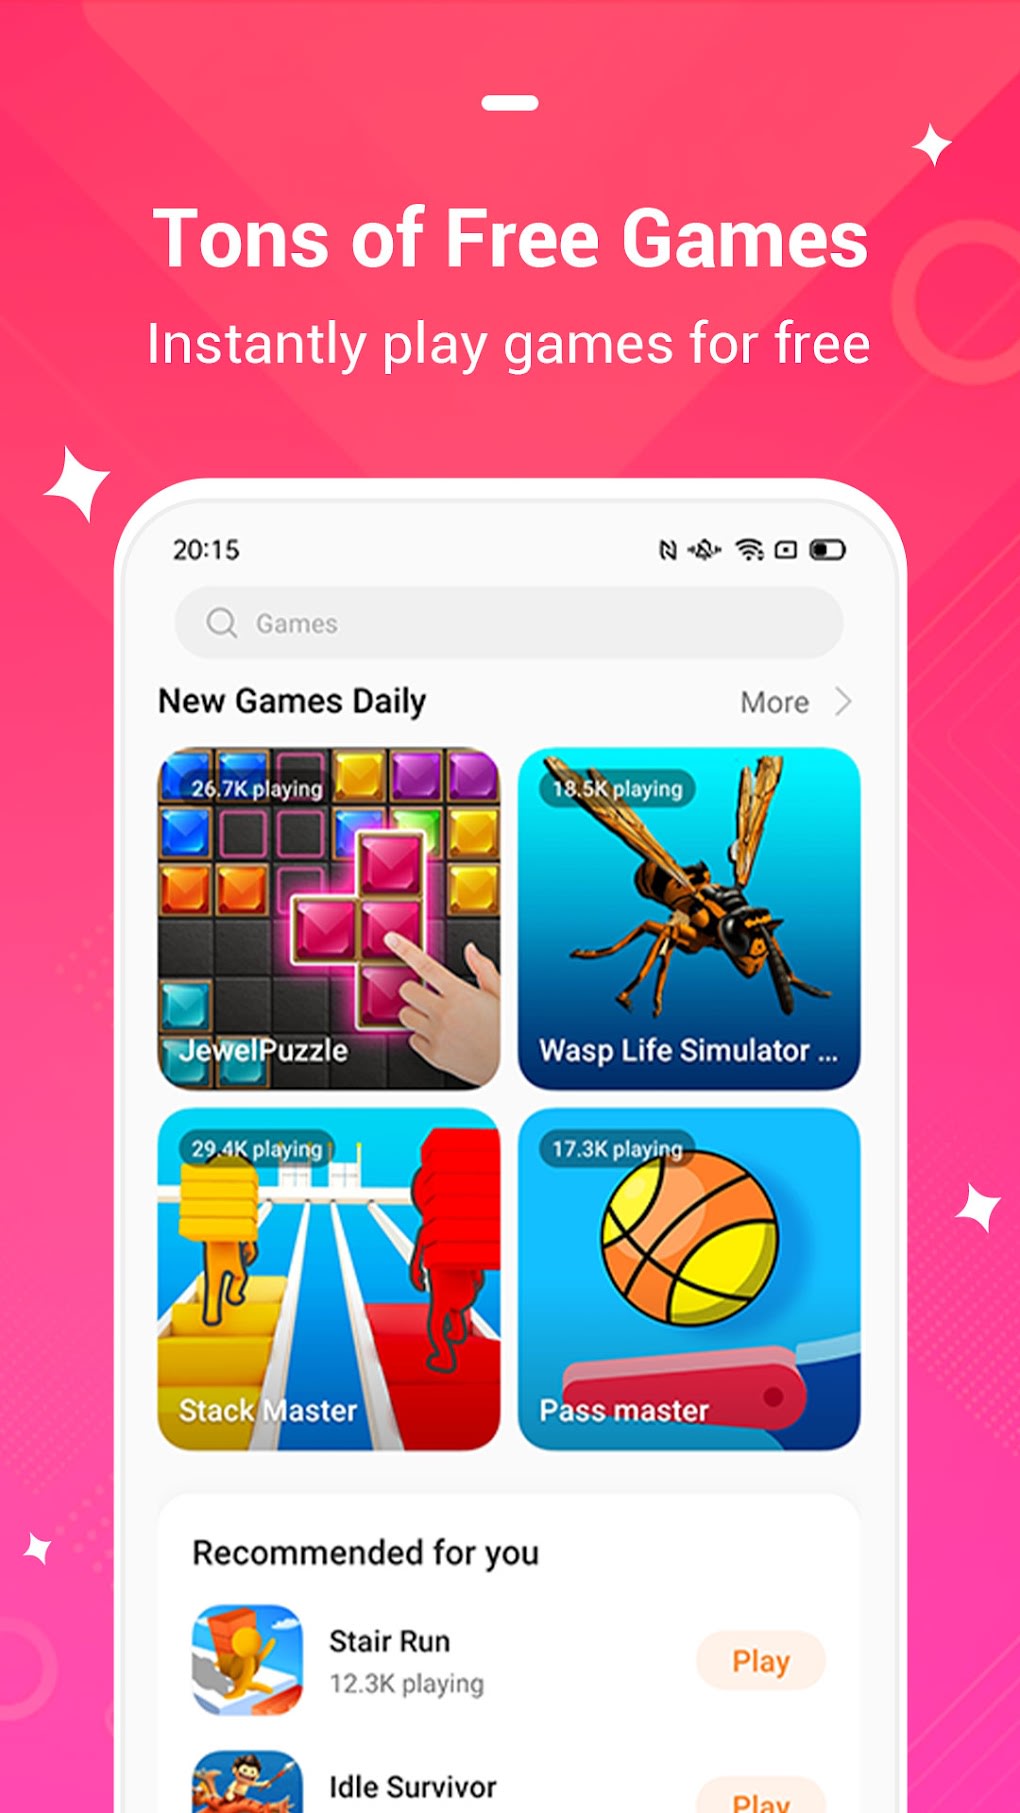 HeyFun - Play Games & Meet New Friends APK for Android - Download